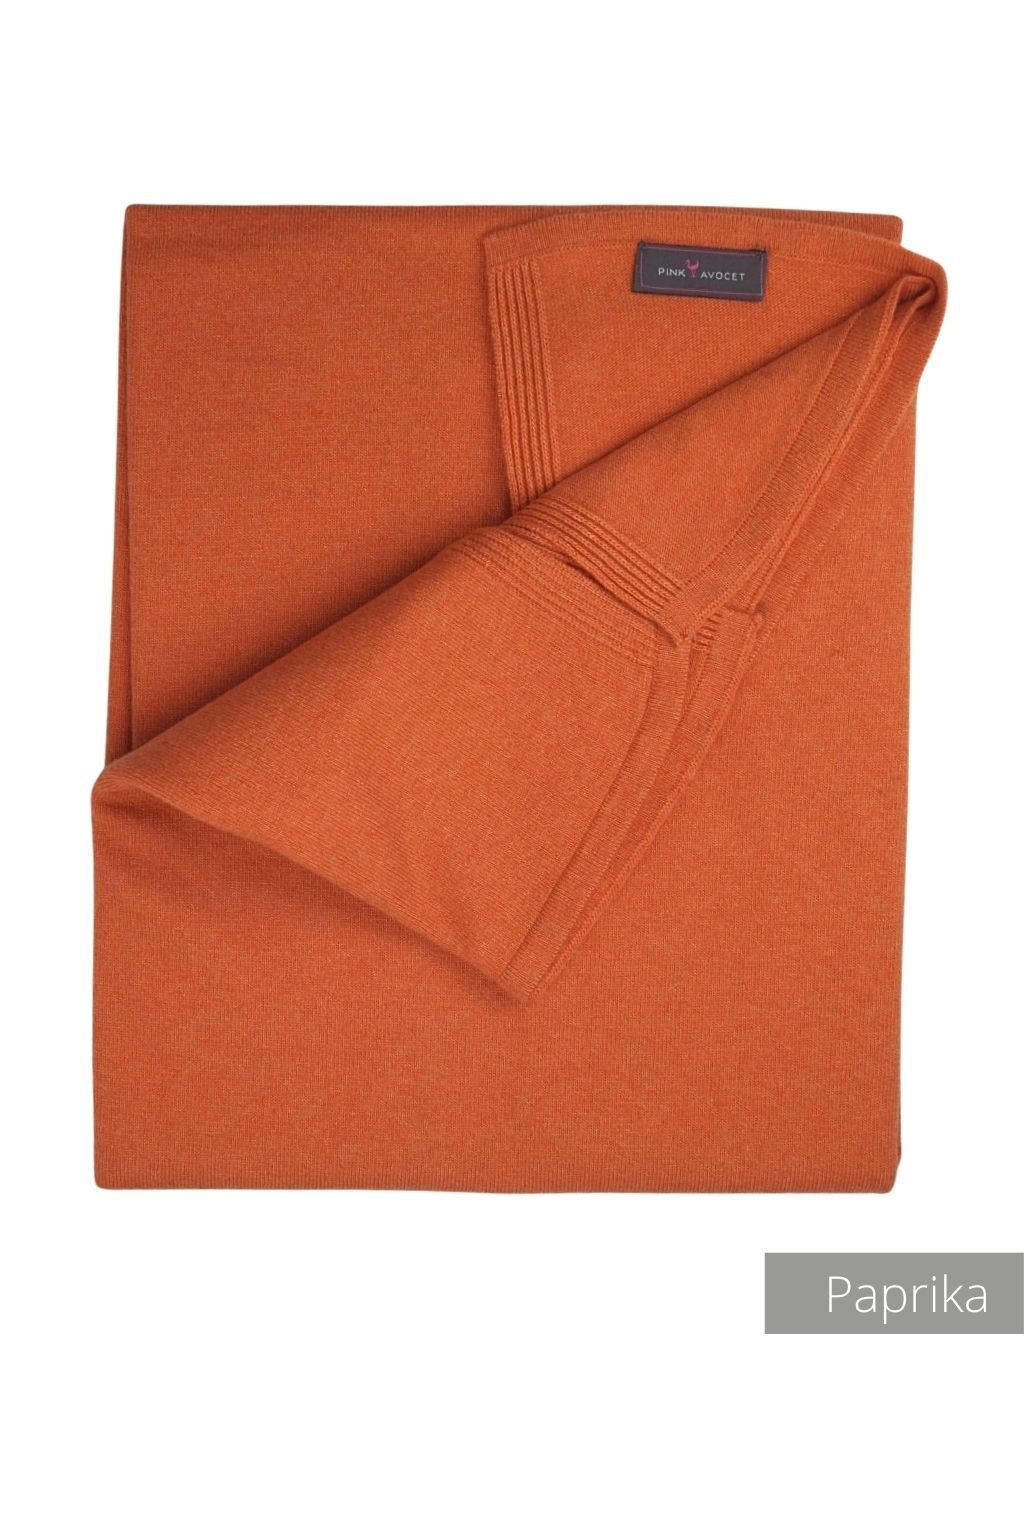 Long Cashmere Wrap (Unisex) Paprika / One size by Pink Avocet